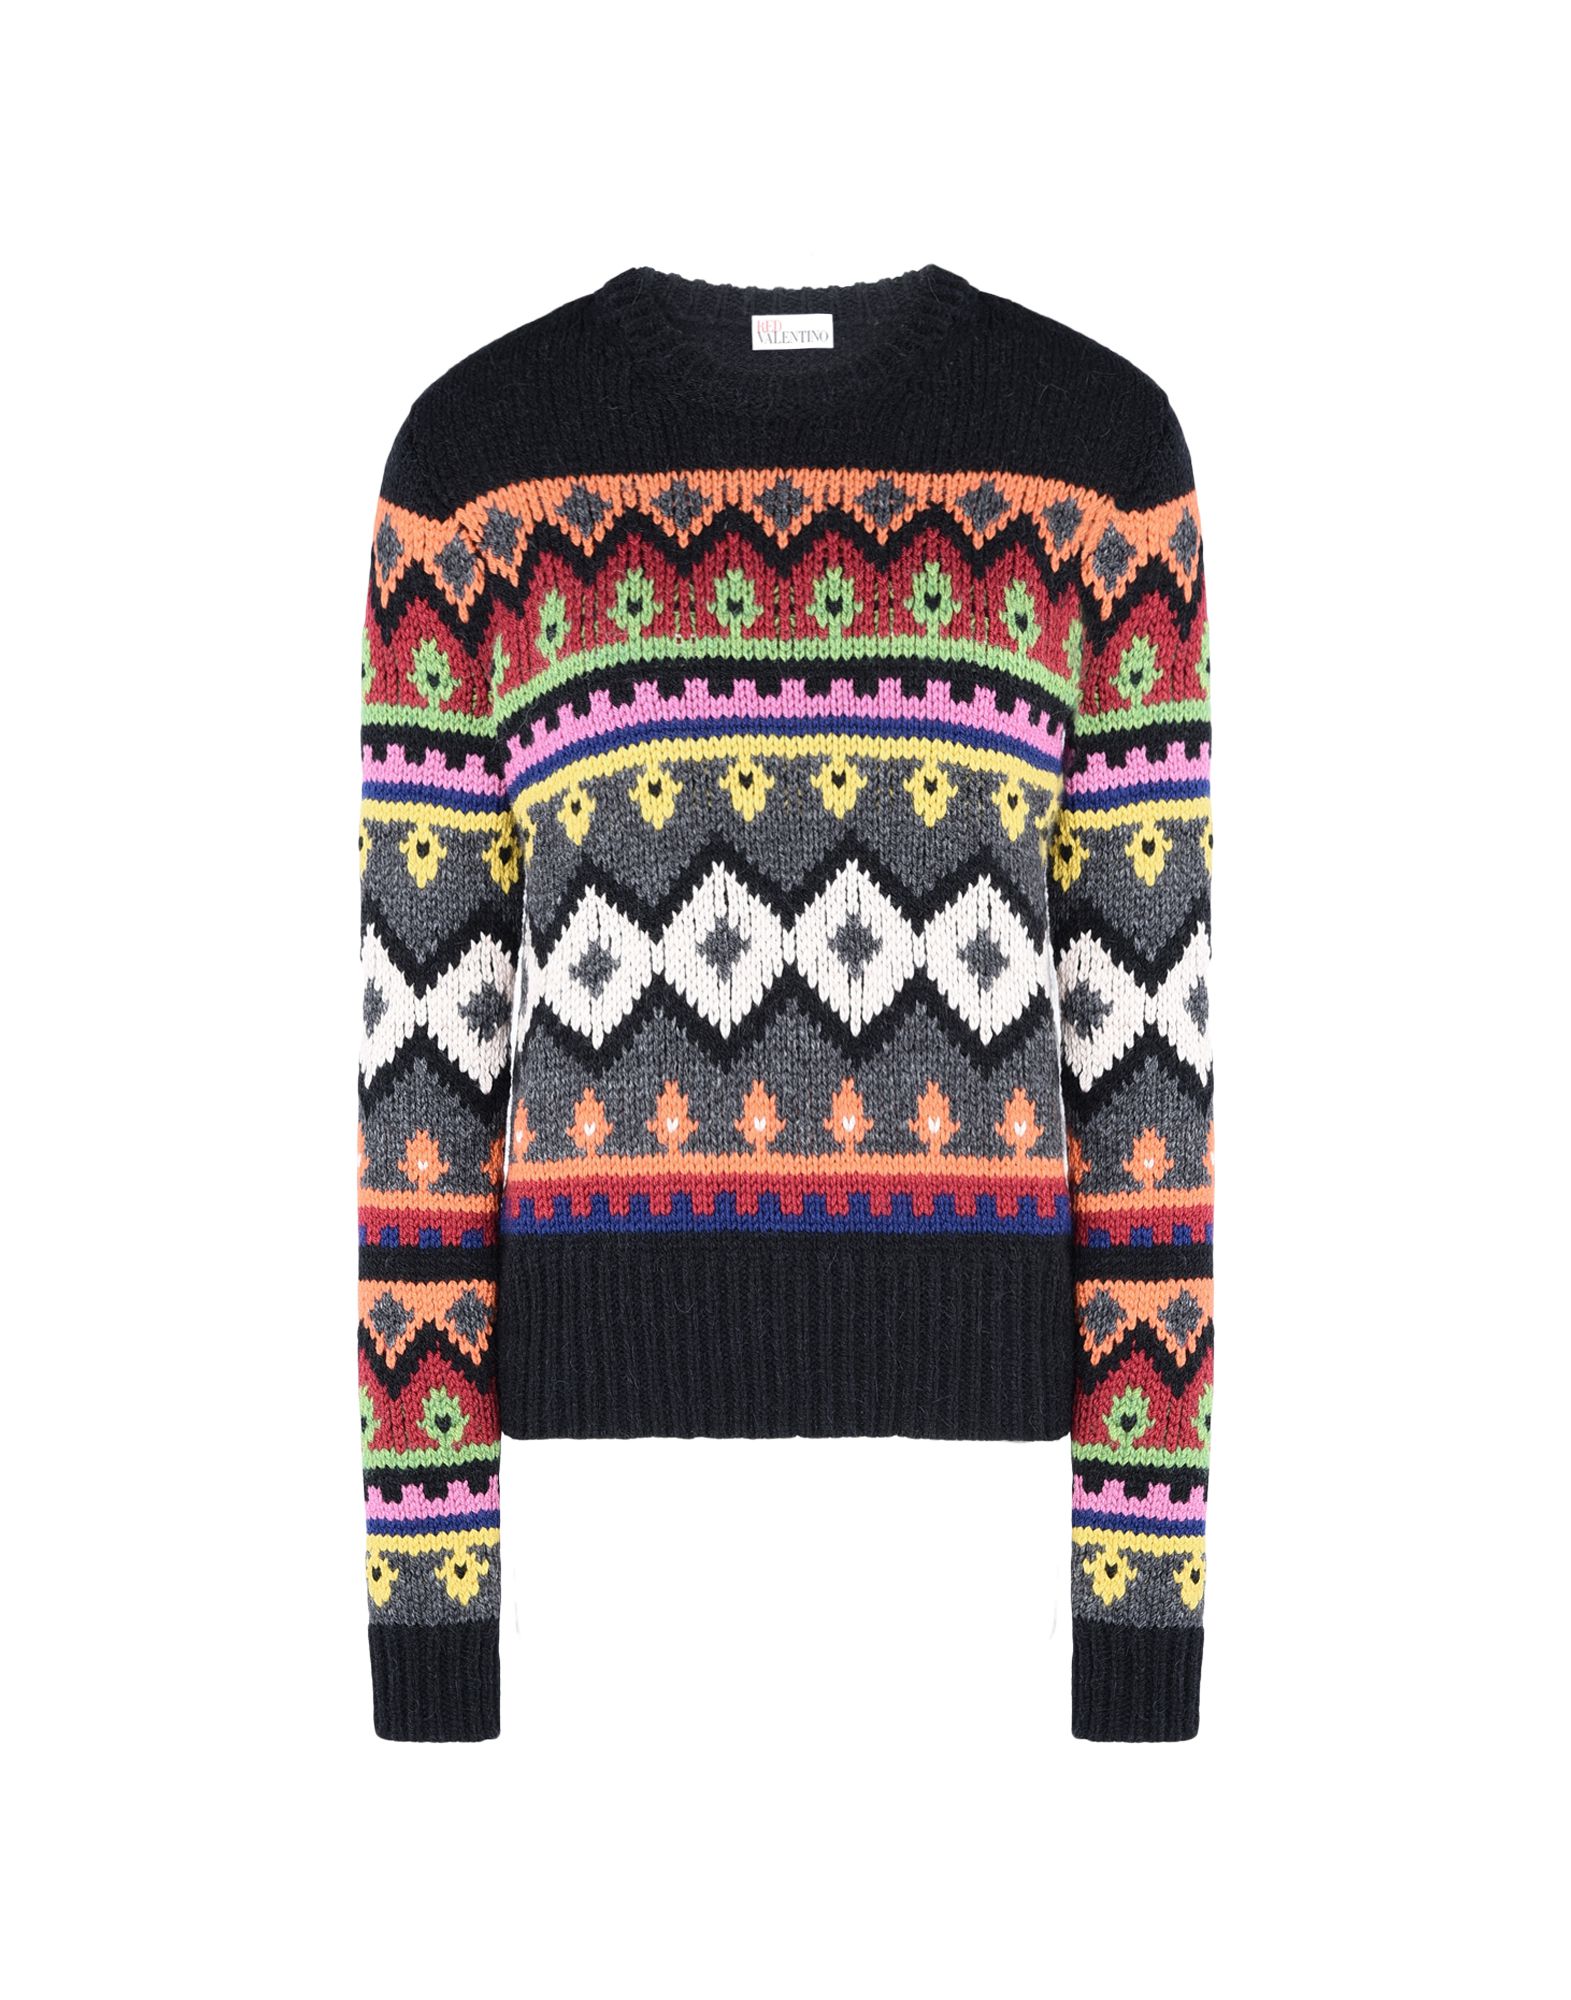 REDValentino Multicolor Fair Isle Wool Sweater - Knit Sweater for Women ...